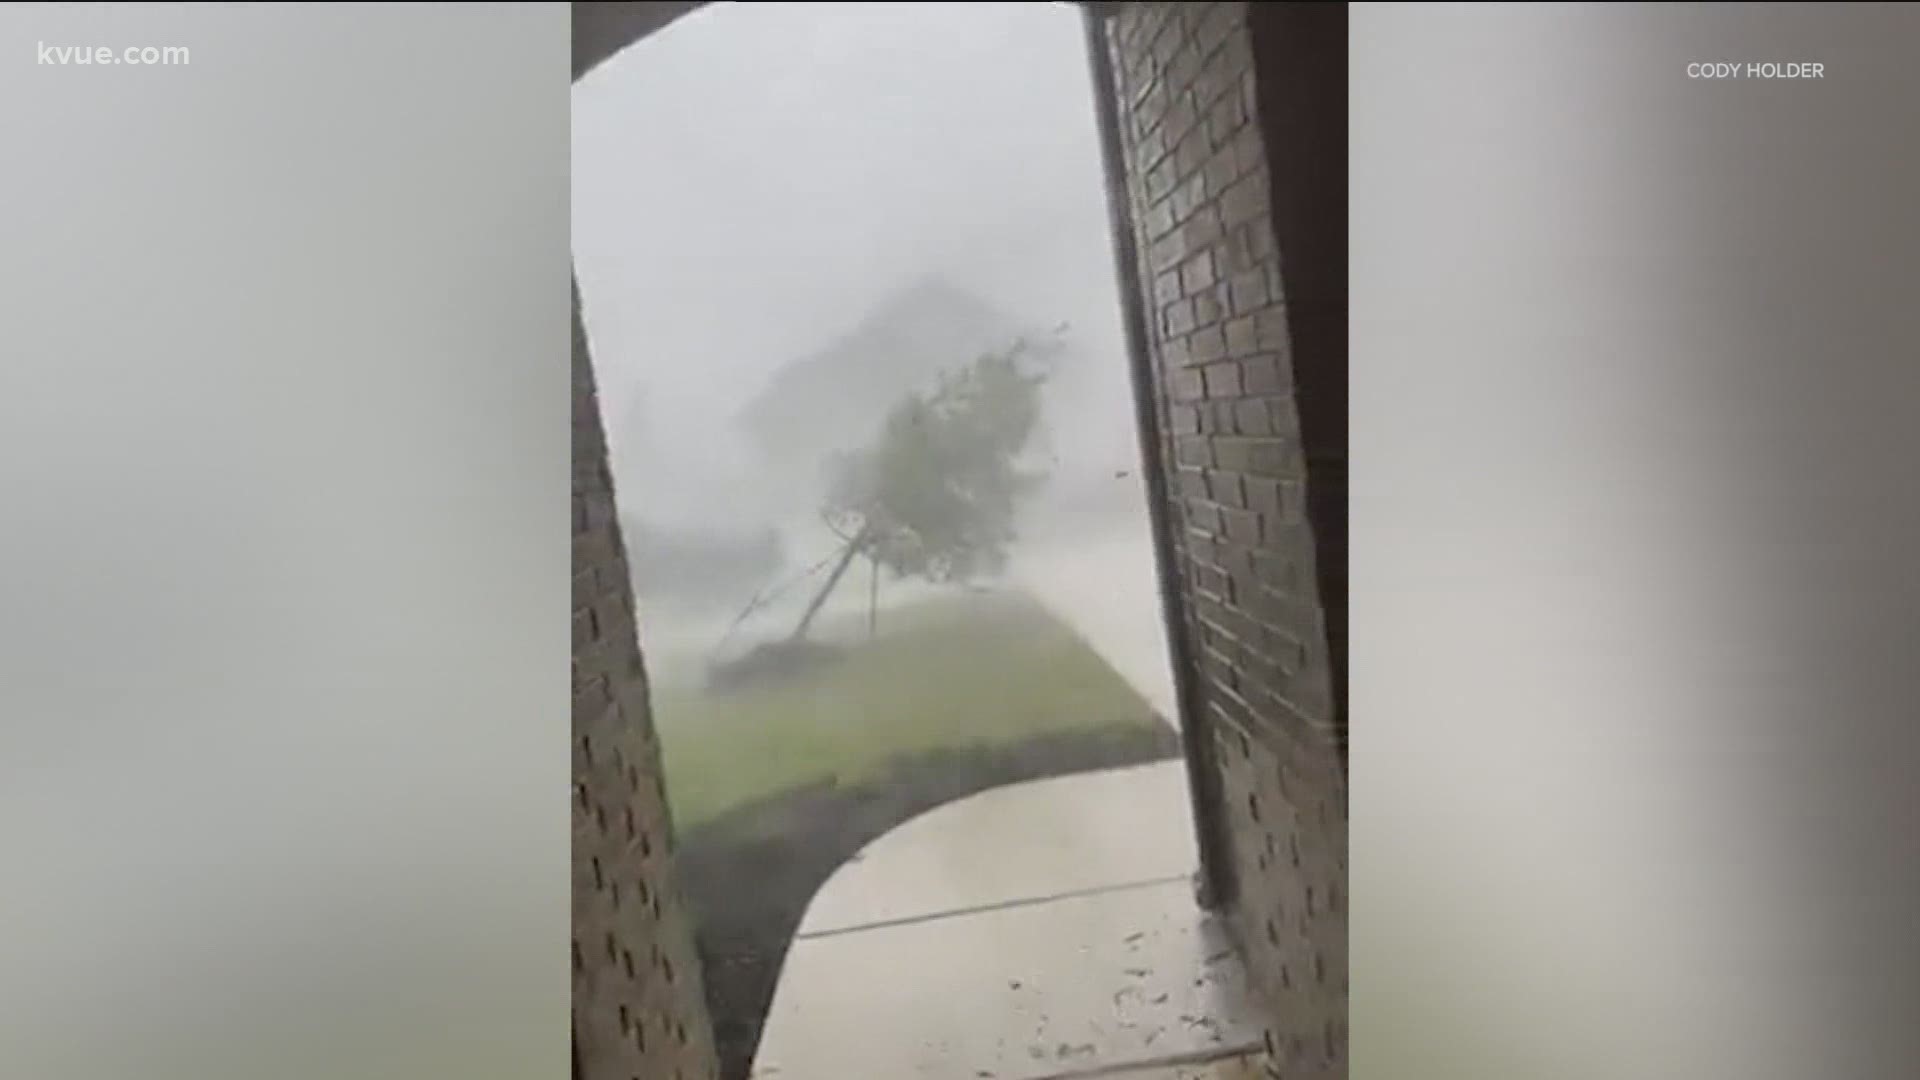 A microburst brought strong winds to Georgetown. The weather phenomenon only affected a small area of Central Texas, while the rest stayed hot and dry.